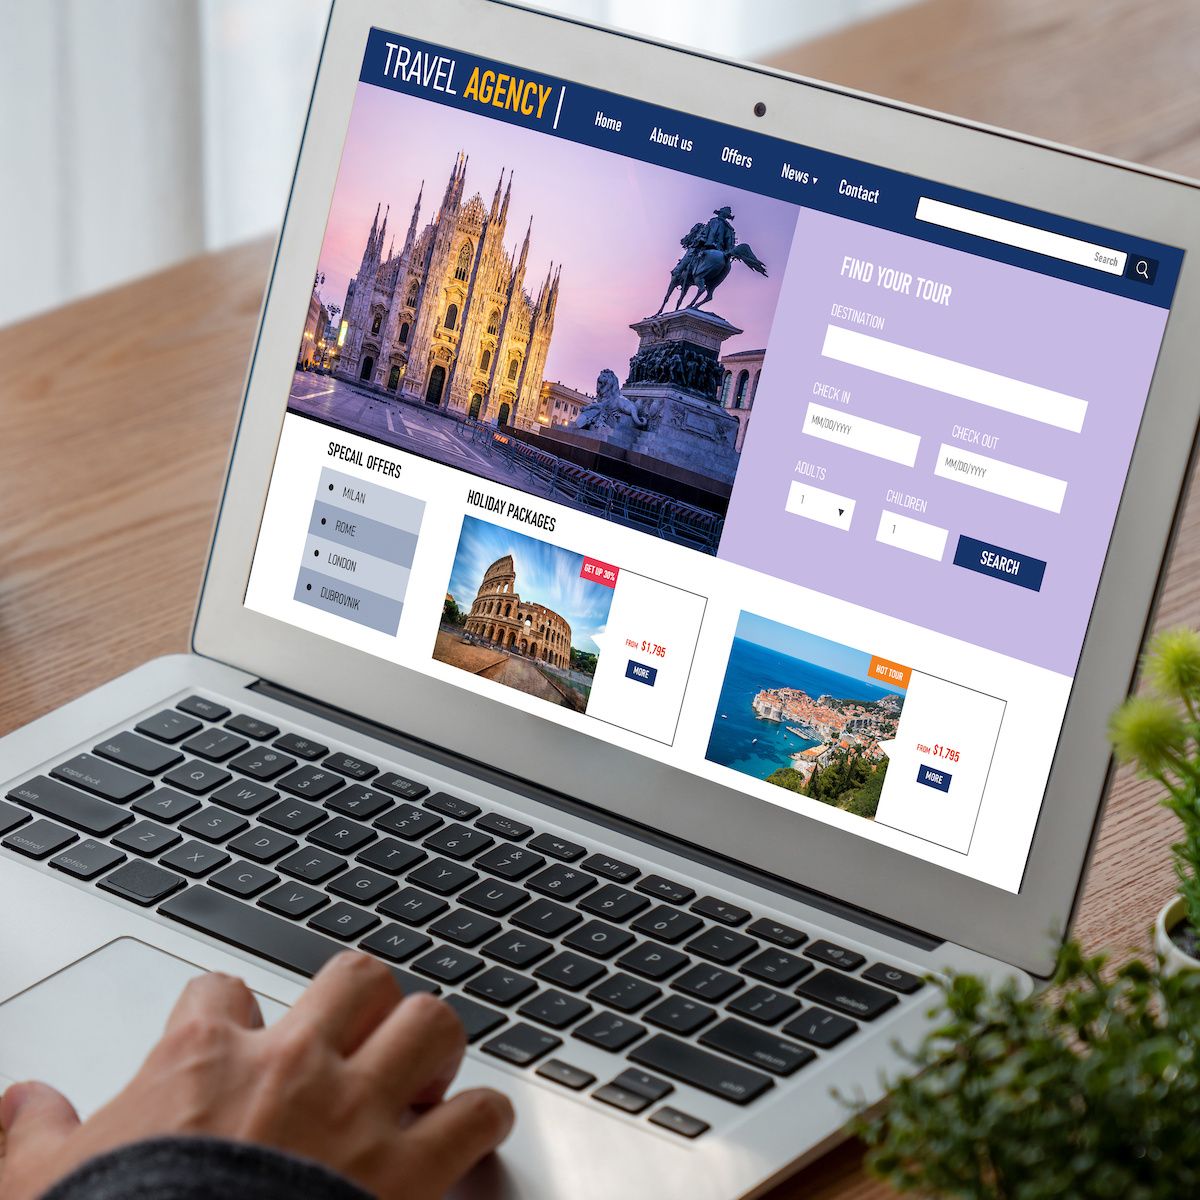 A person searches an online travel agency website for flights and hotels, both of which can be found at cheaper prices when using a VPN.